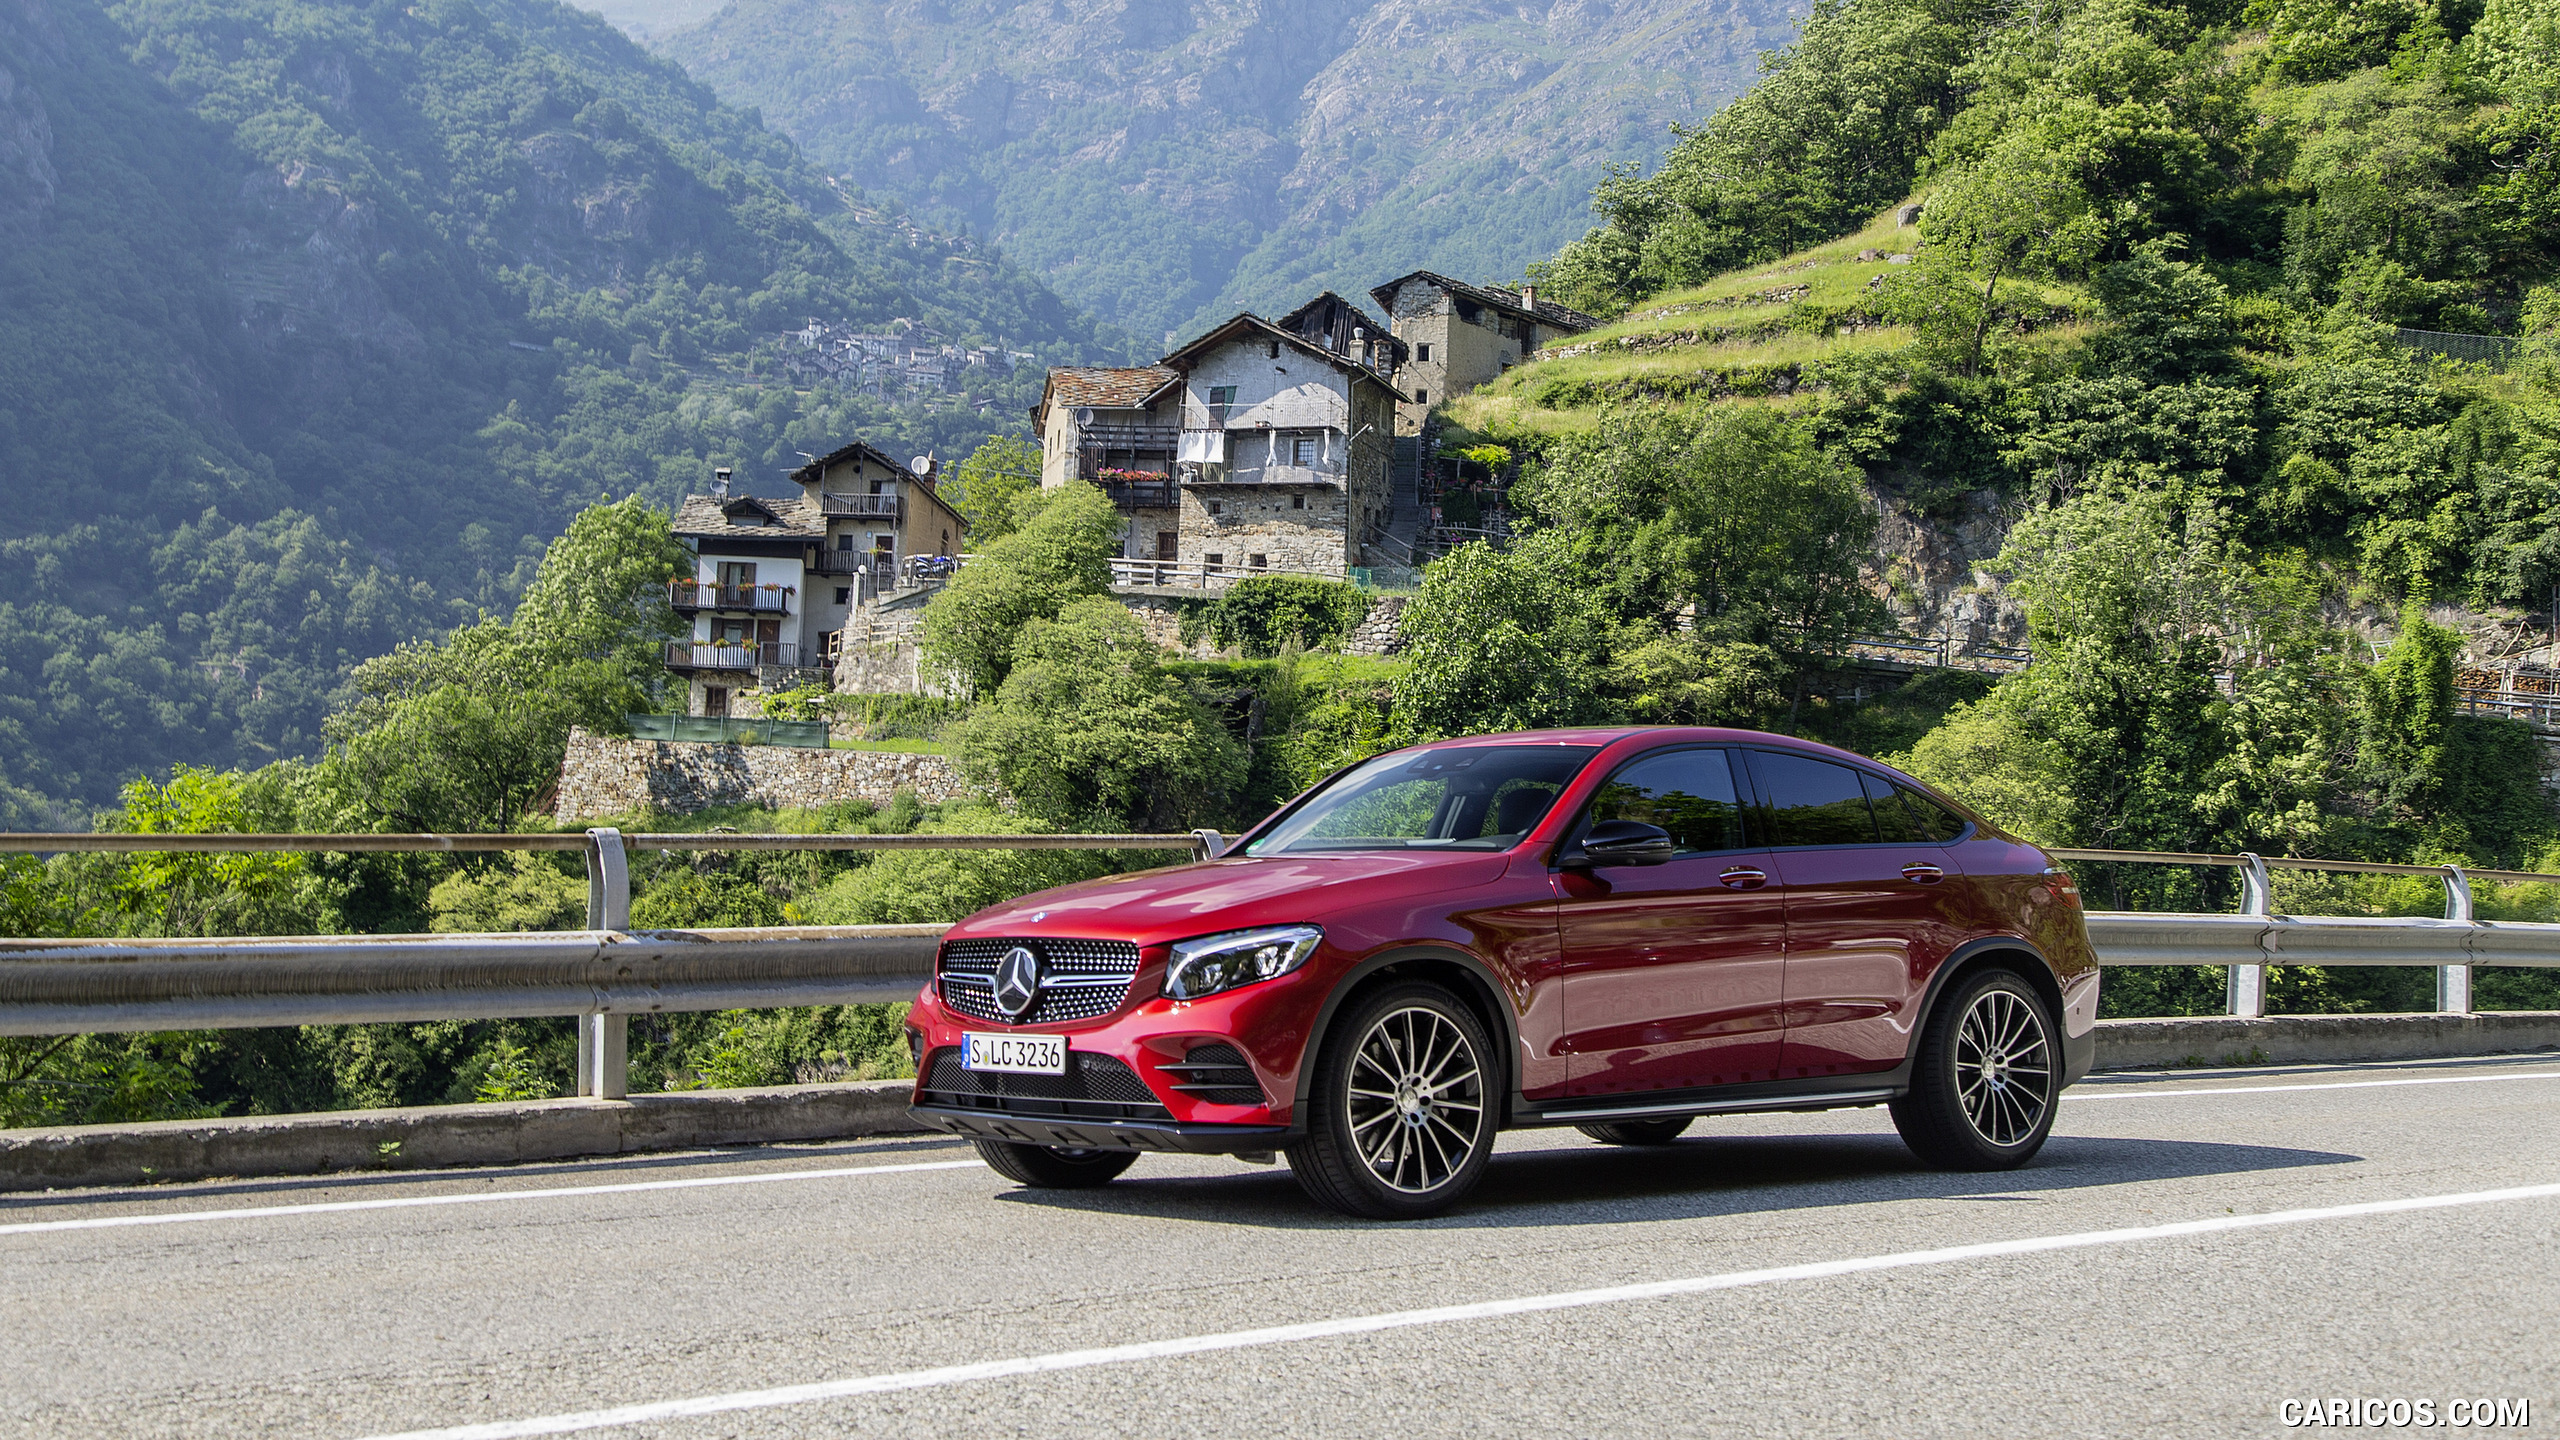 2017 Mercedes-Benz GLC 350 d Coupe (Diesel; Color: Hyacinth Red) - Front Three-Quarter, #74 of 144